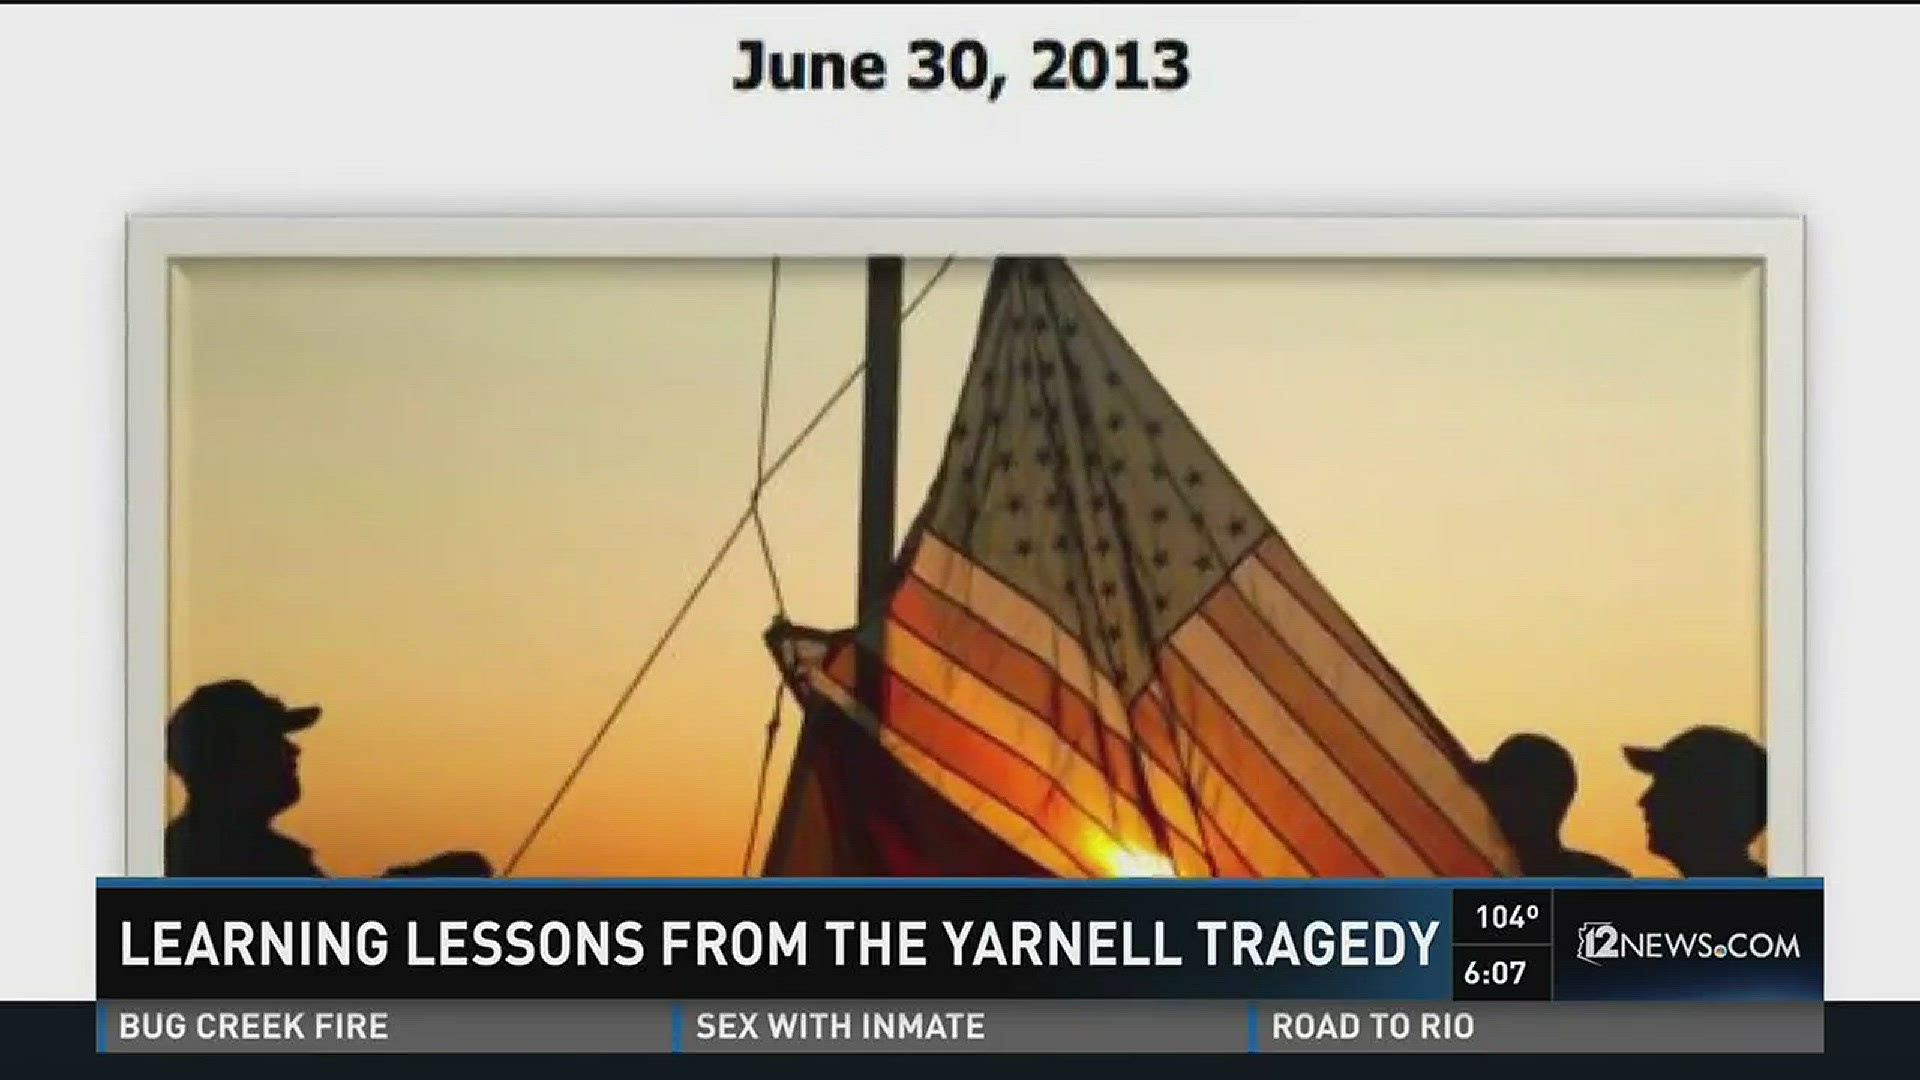 Joe Dana explains the lessons and recommendations that have been put into place following the Yarnell tragedy.